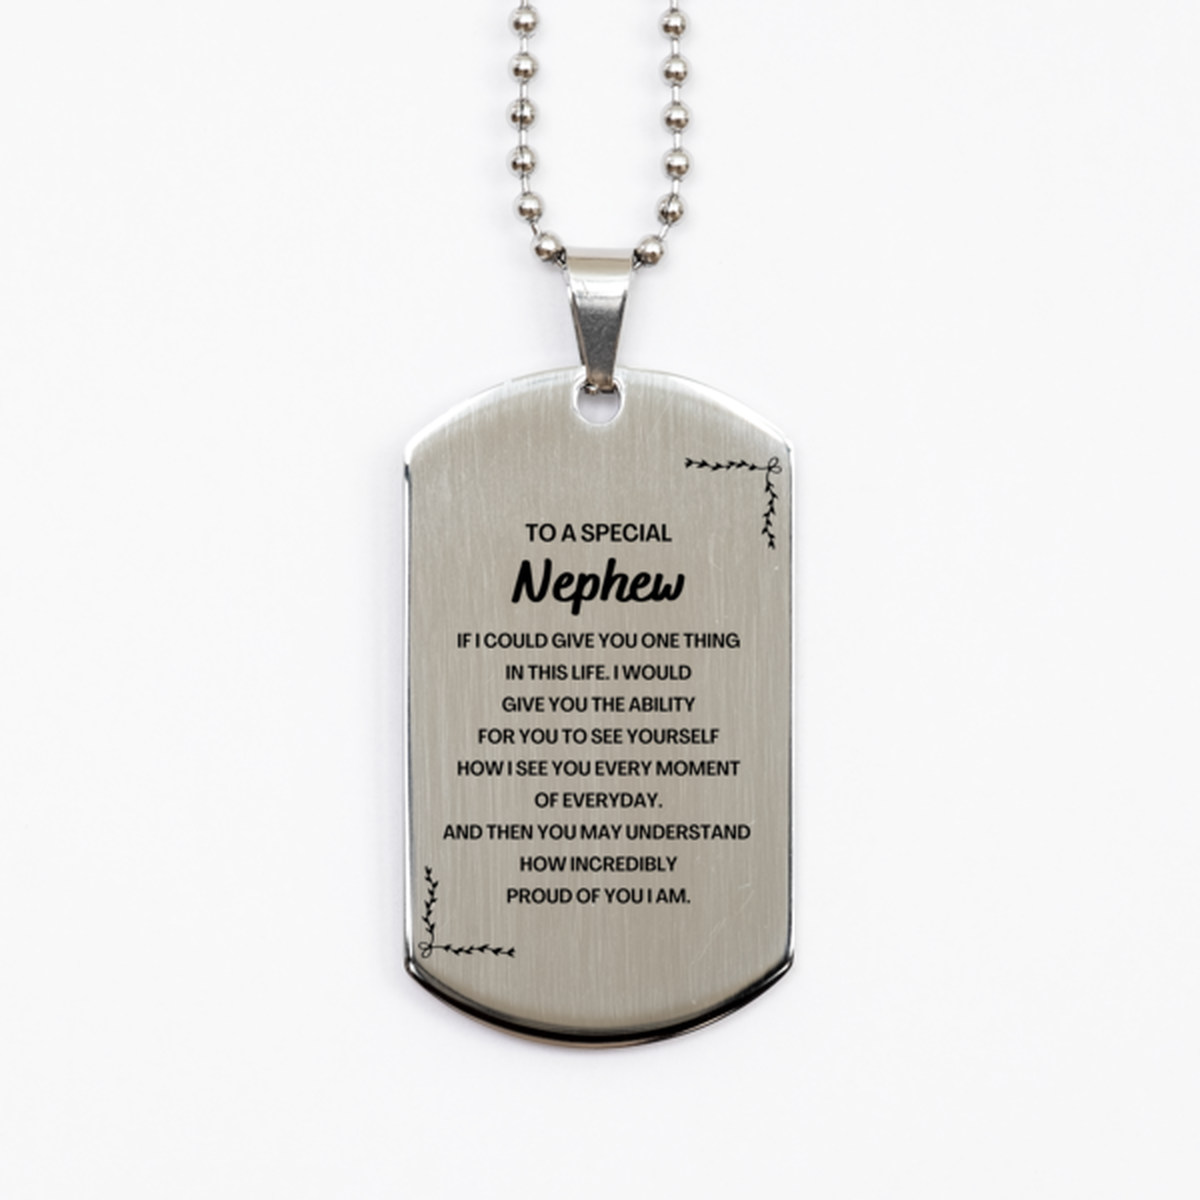 To My Nephew Silver Dog Tag, Gifts For Nephew Engraved, Inspirational Gifts for Christmas Birthday, Epic Gifts for Nephew To A Special Nephew how incredibly proud of you I am